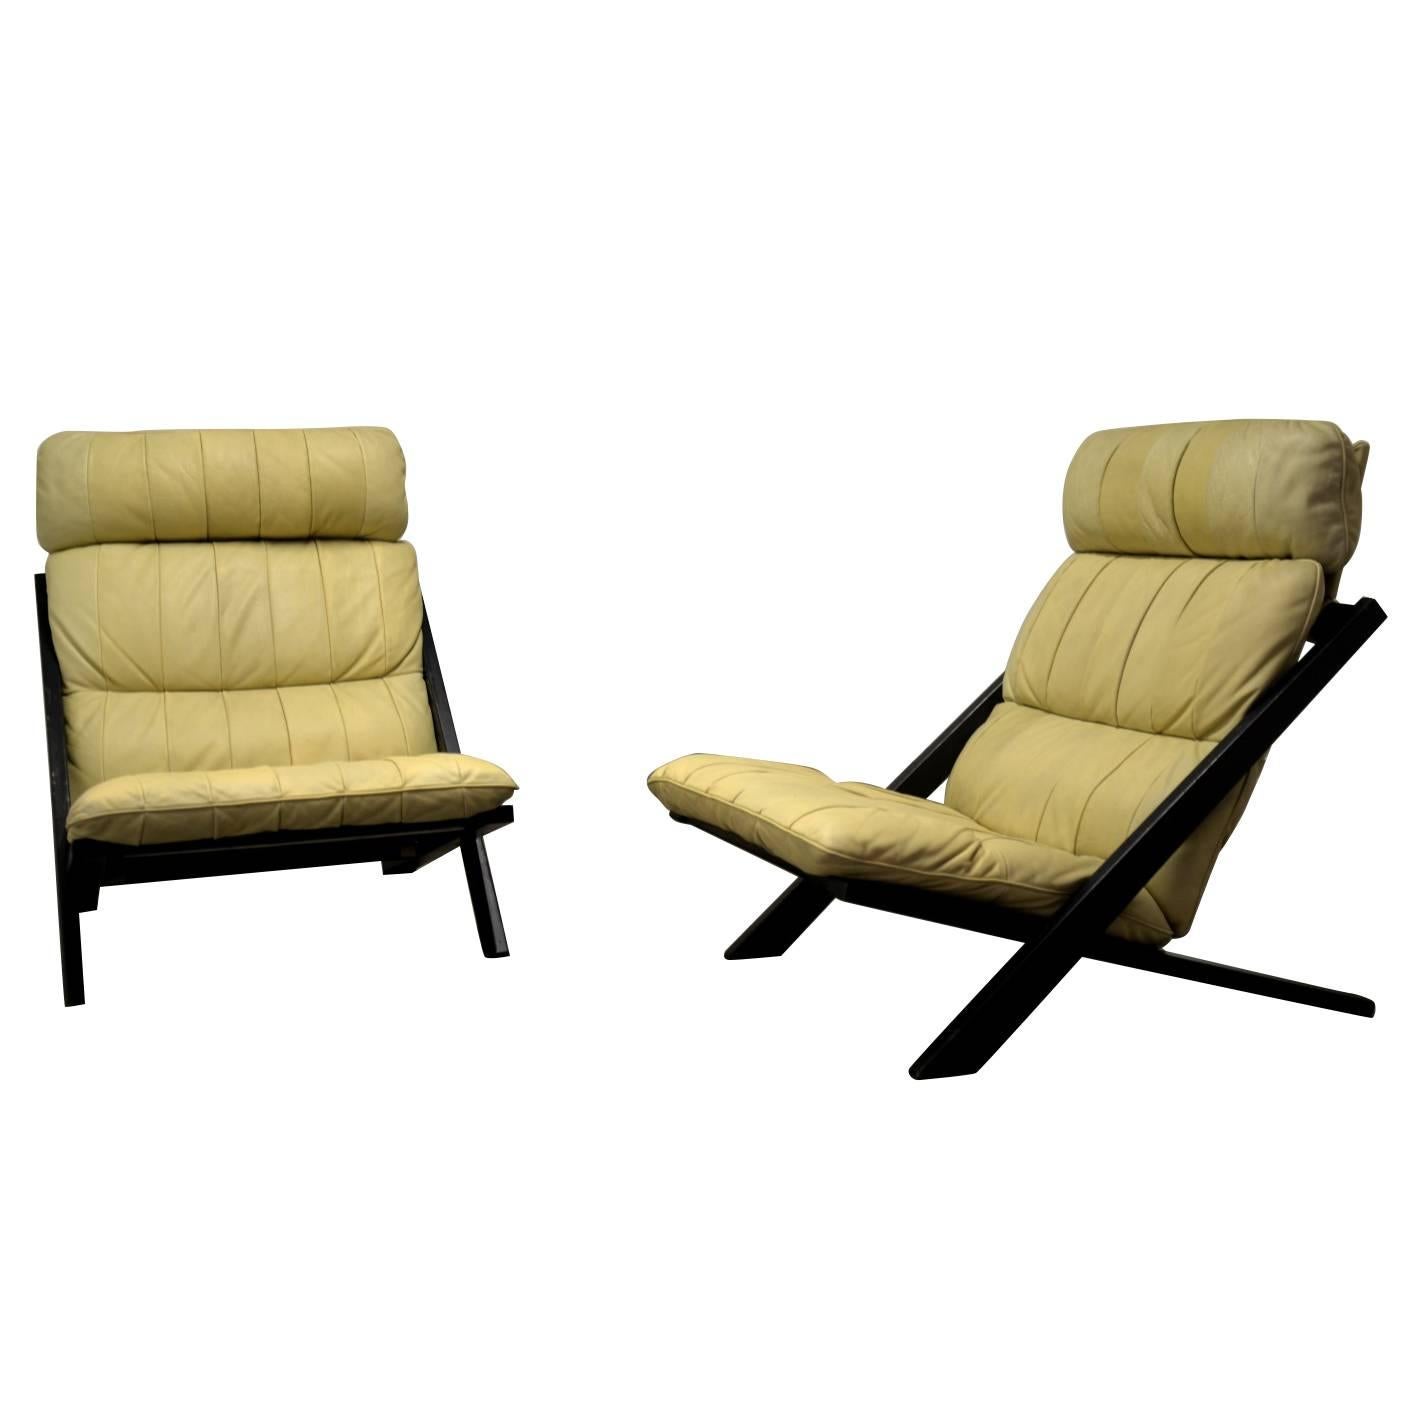 Patchwork Leather Lounge Chair by Ueli Berger for De Sede, Switzerland 1970`s For Sale